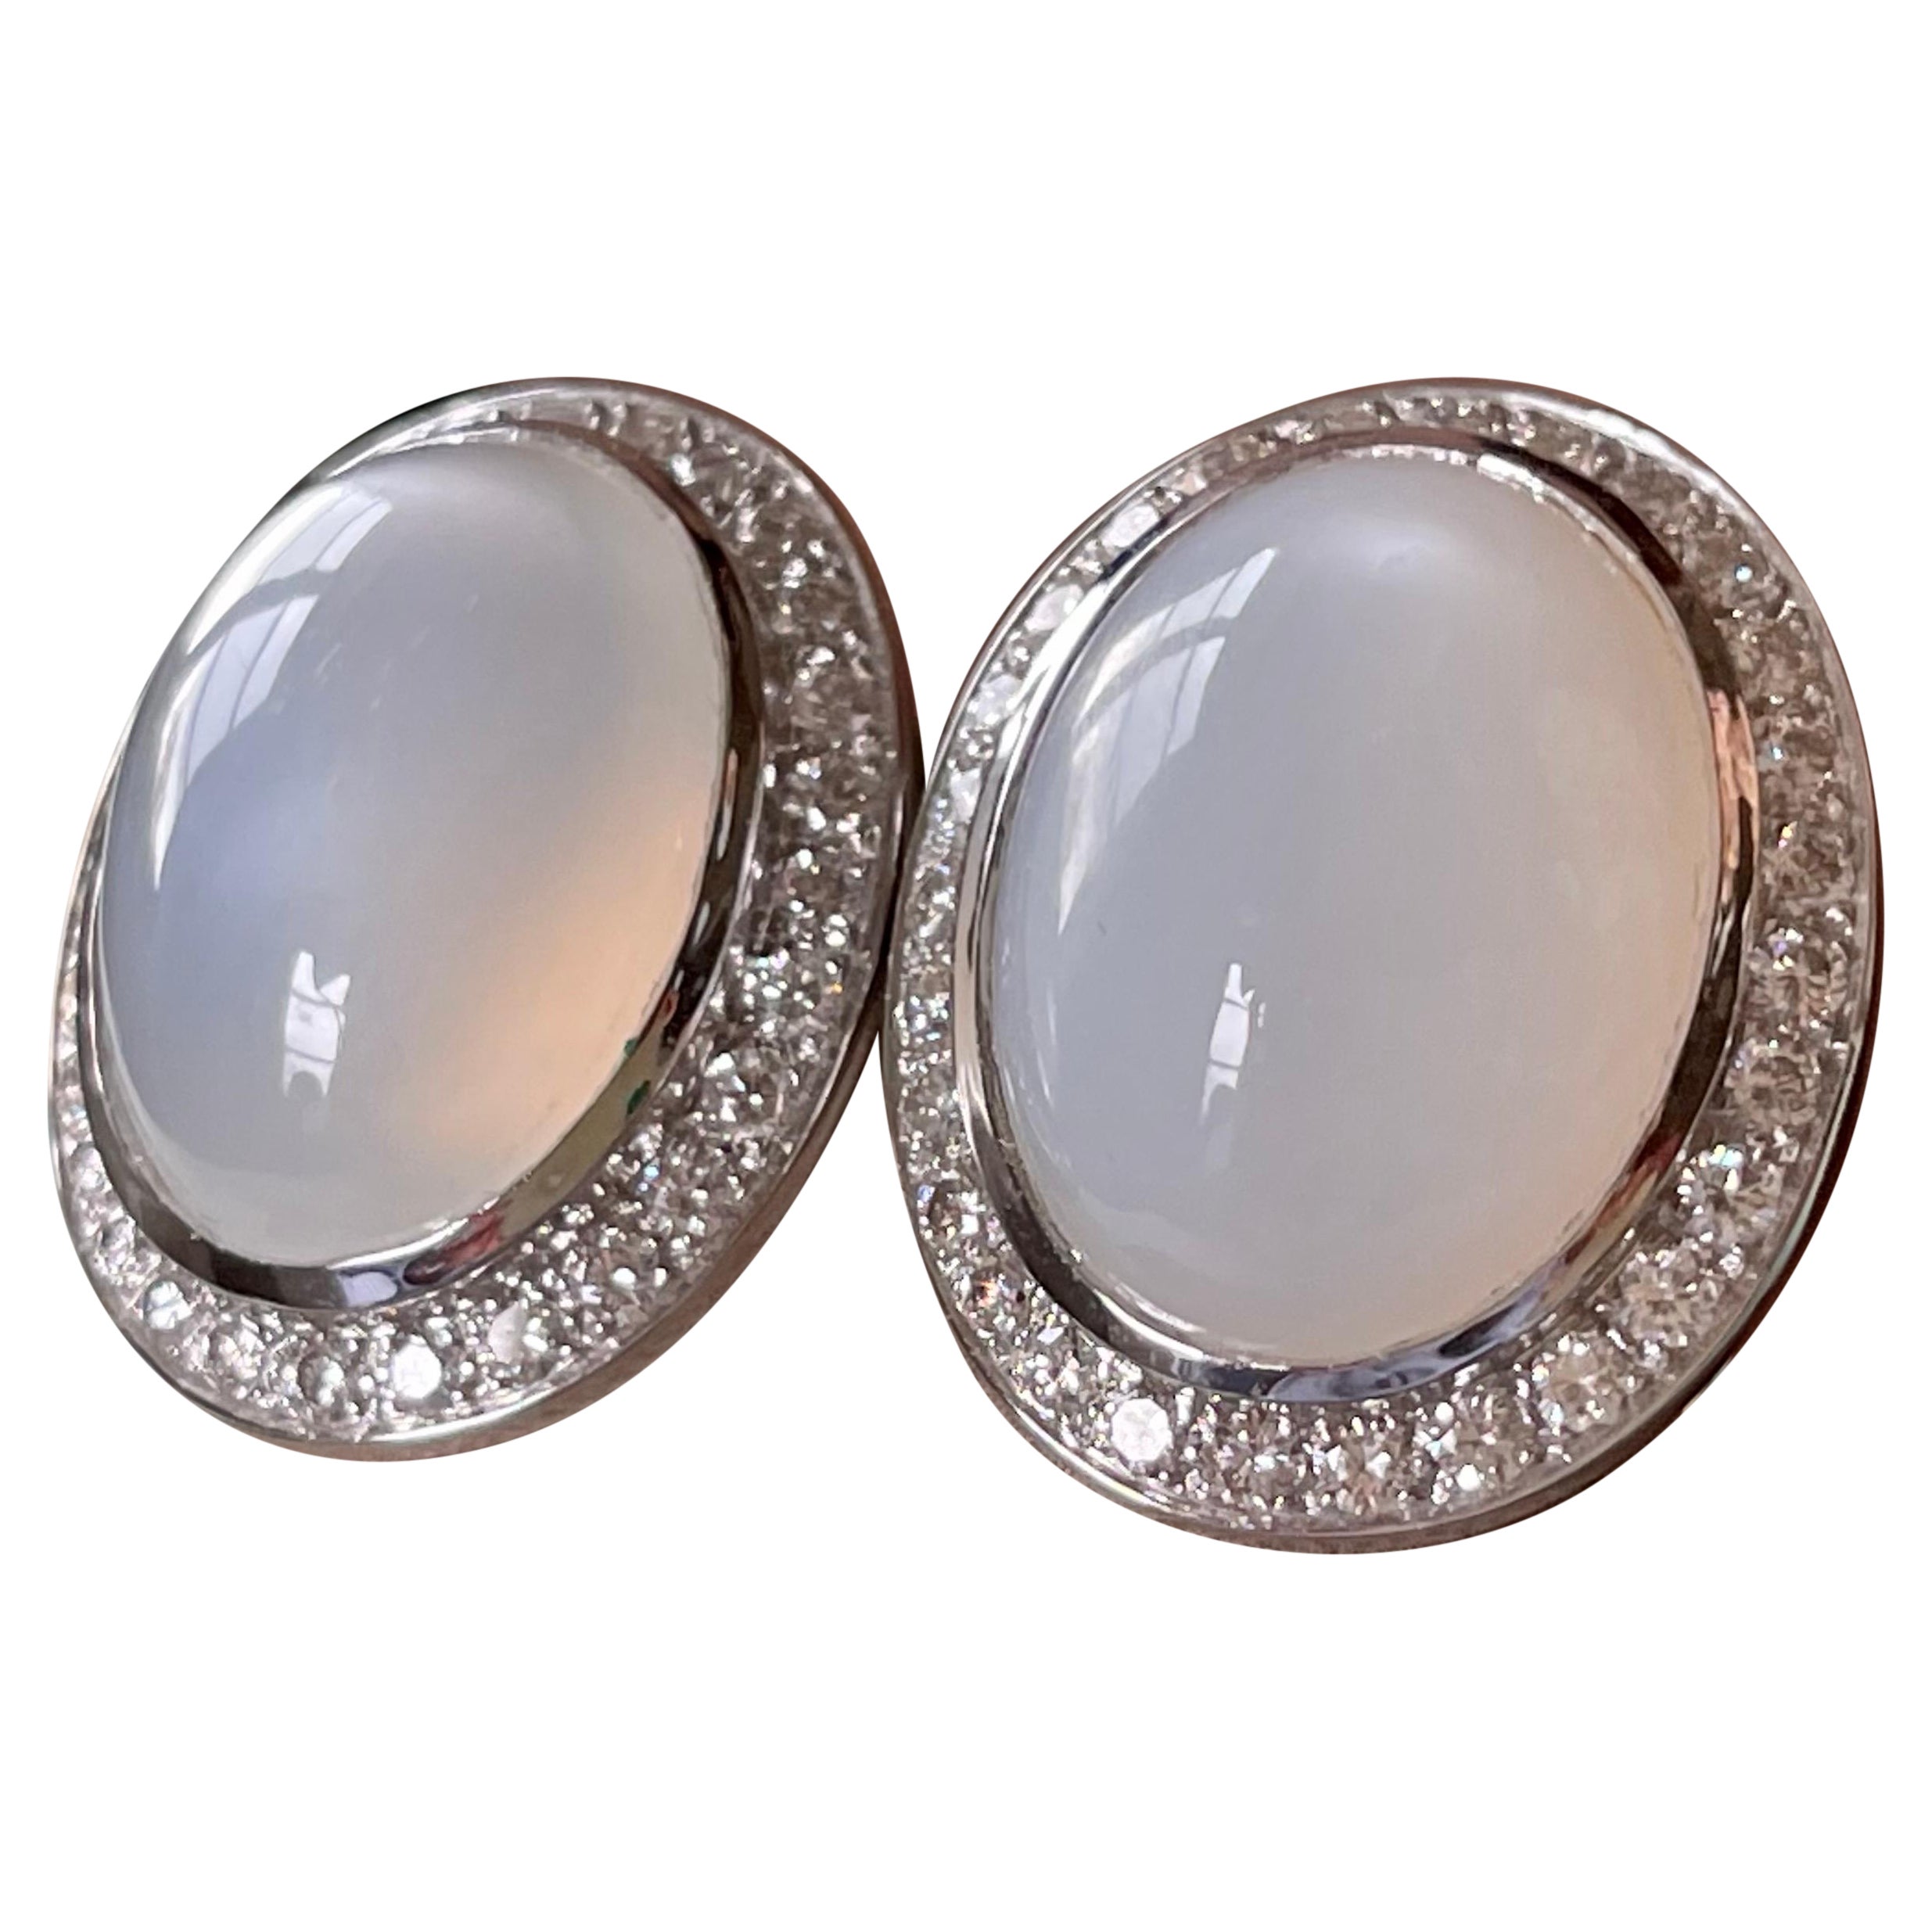 Elegant 18 K White Gold Earclips with Moonstones and Diamonds